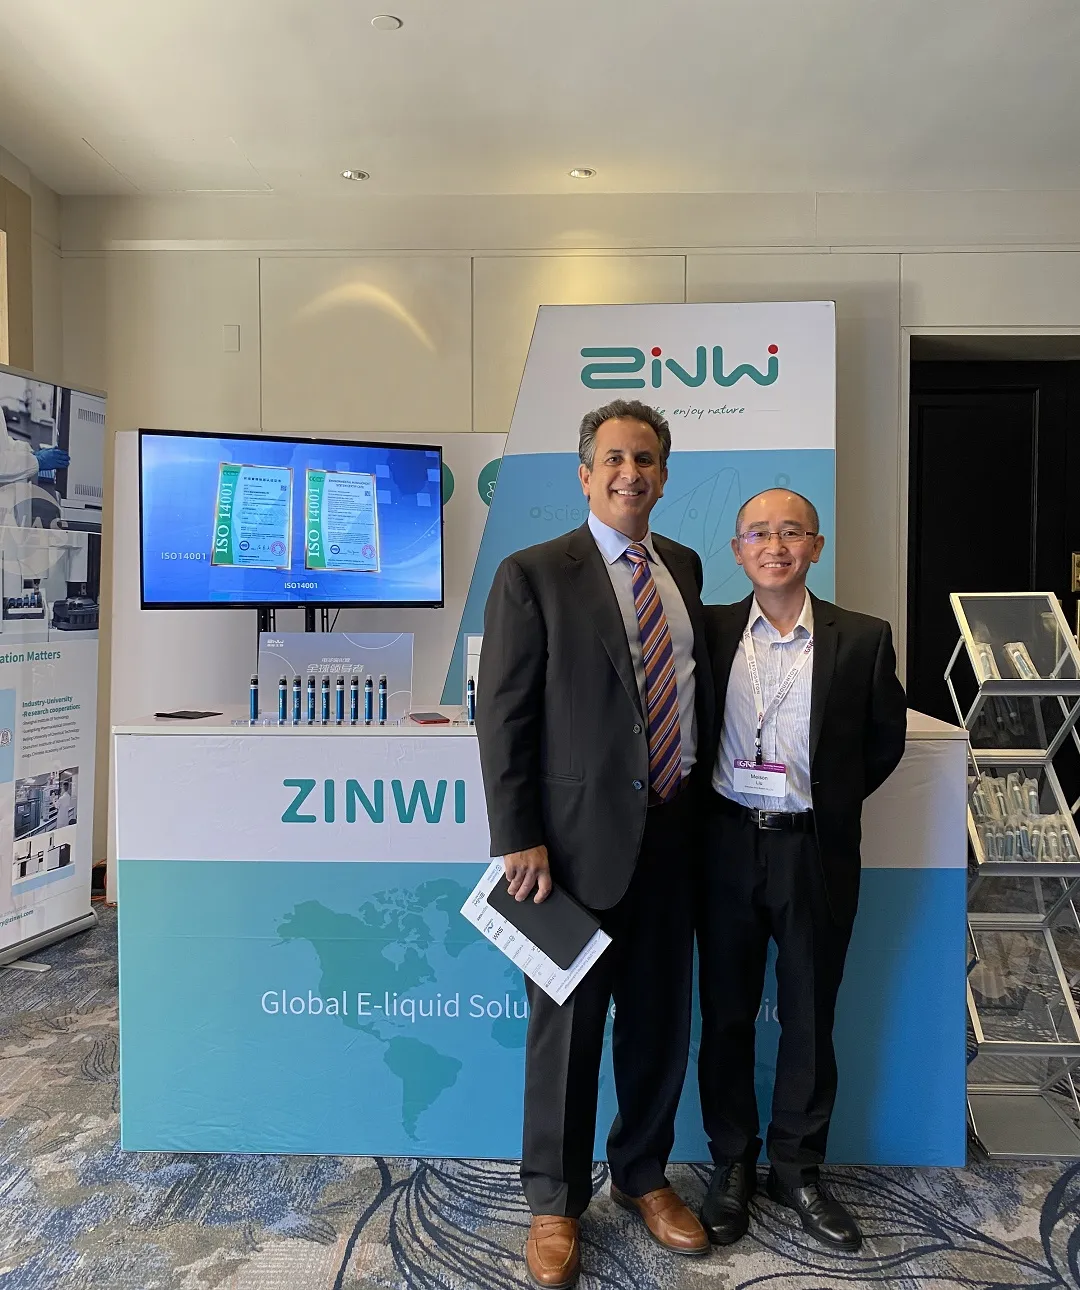 Zinwi's breakthrough in the field of sweet-flavored nicotine salt technology in the international market